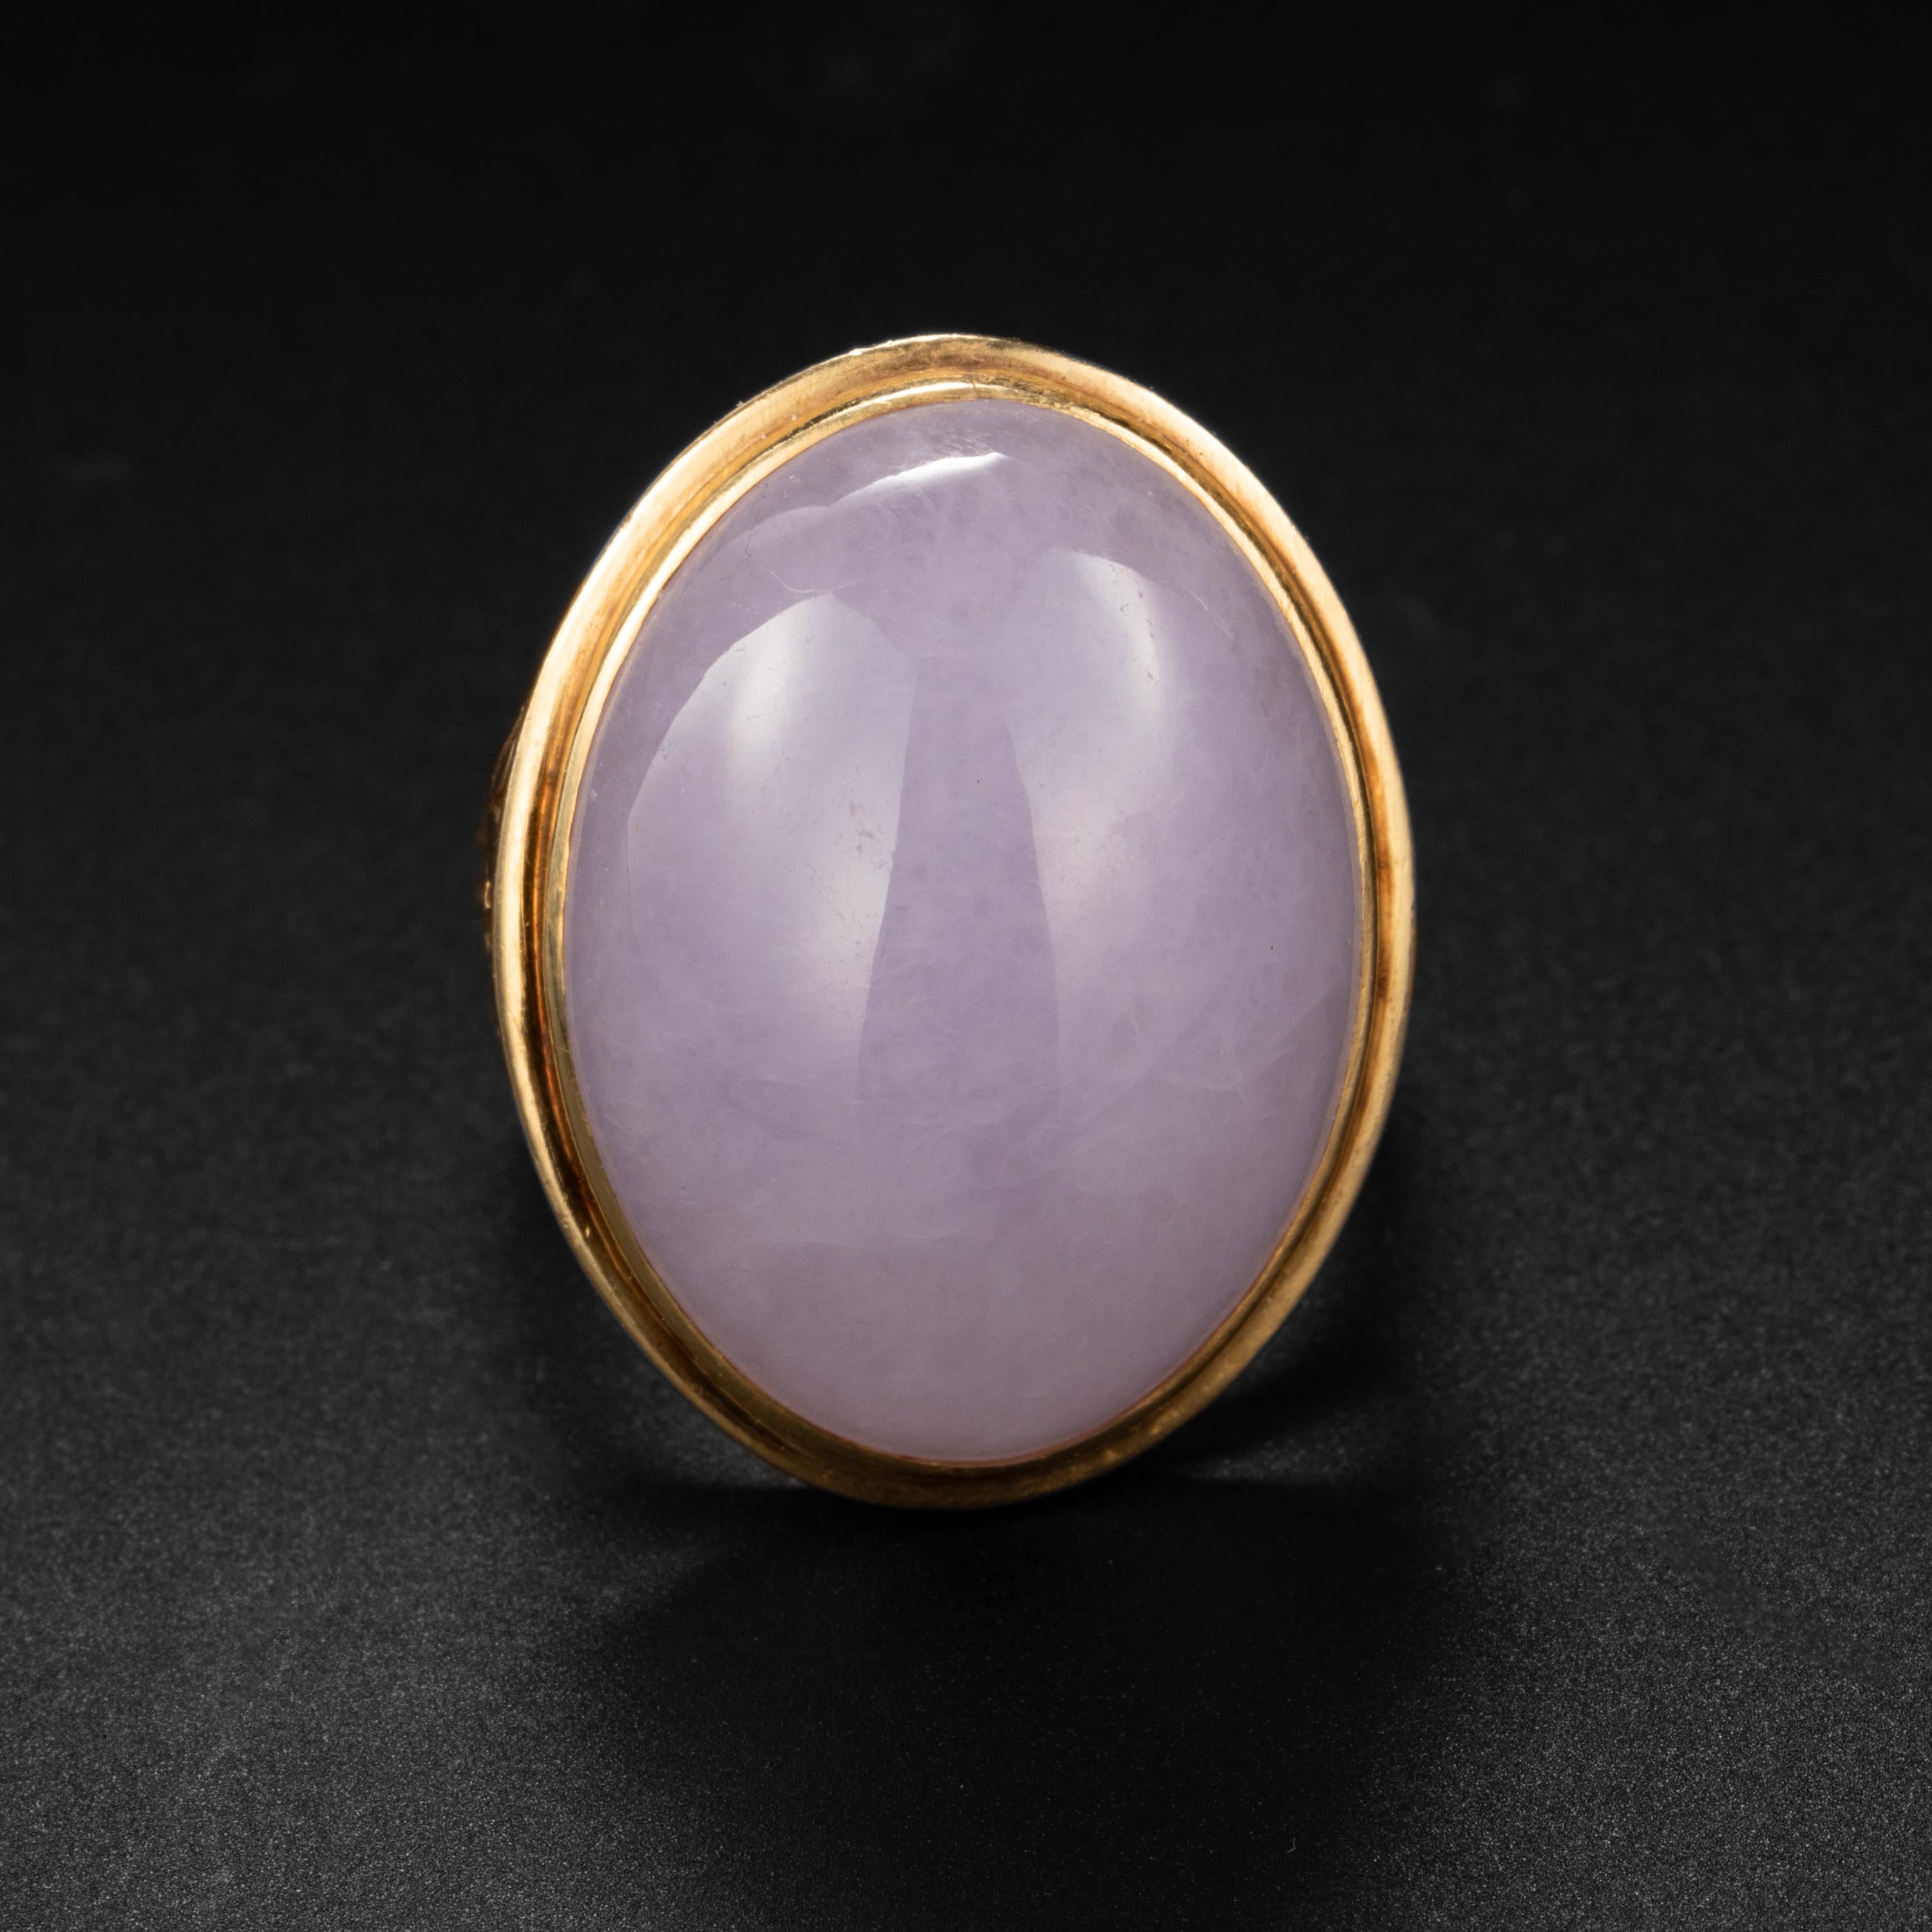 Created by the iconic Midcentury jeweler, Ming's of Hawaii, this entirely hand-fabricated ring in 14K yellow gold features a magnificent and luminous bright lavender oval cabochon of natural and untreated Burmese jadeite. The jade stone measures